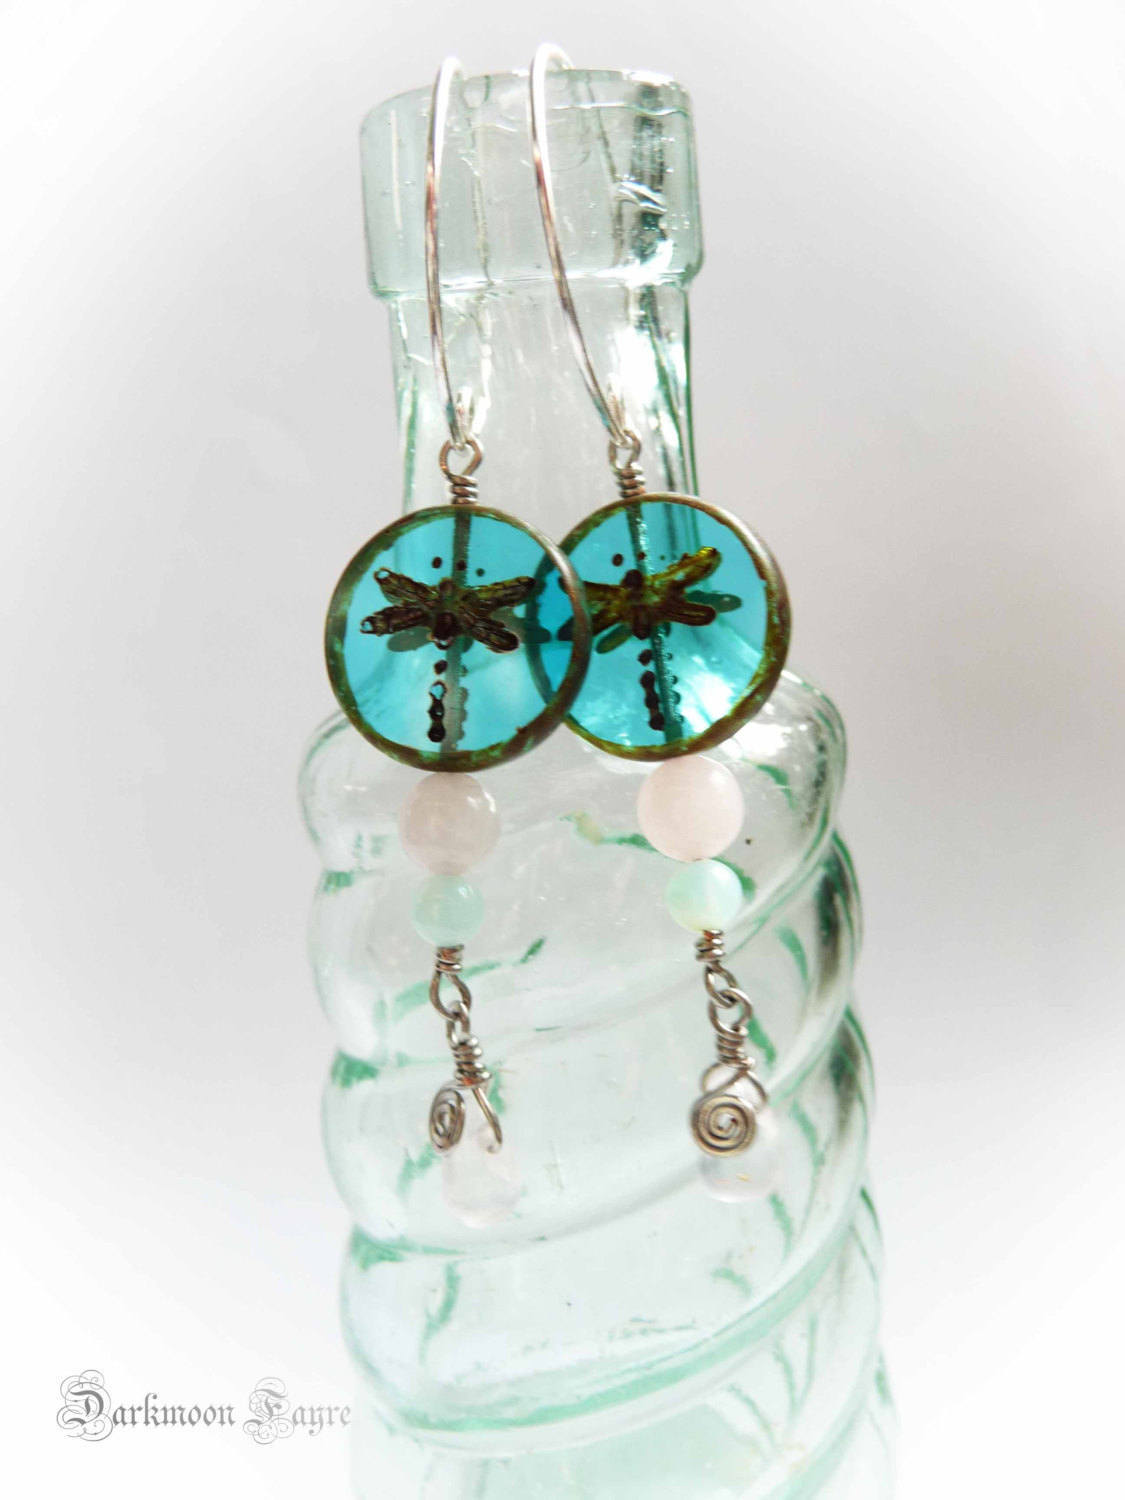 Dragonfly Dream Earrings. African Sky Blue Opal. Rose Quartz. Picasso Turquoise Glass. Silver - Darkmoon Fayre